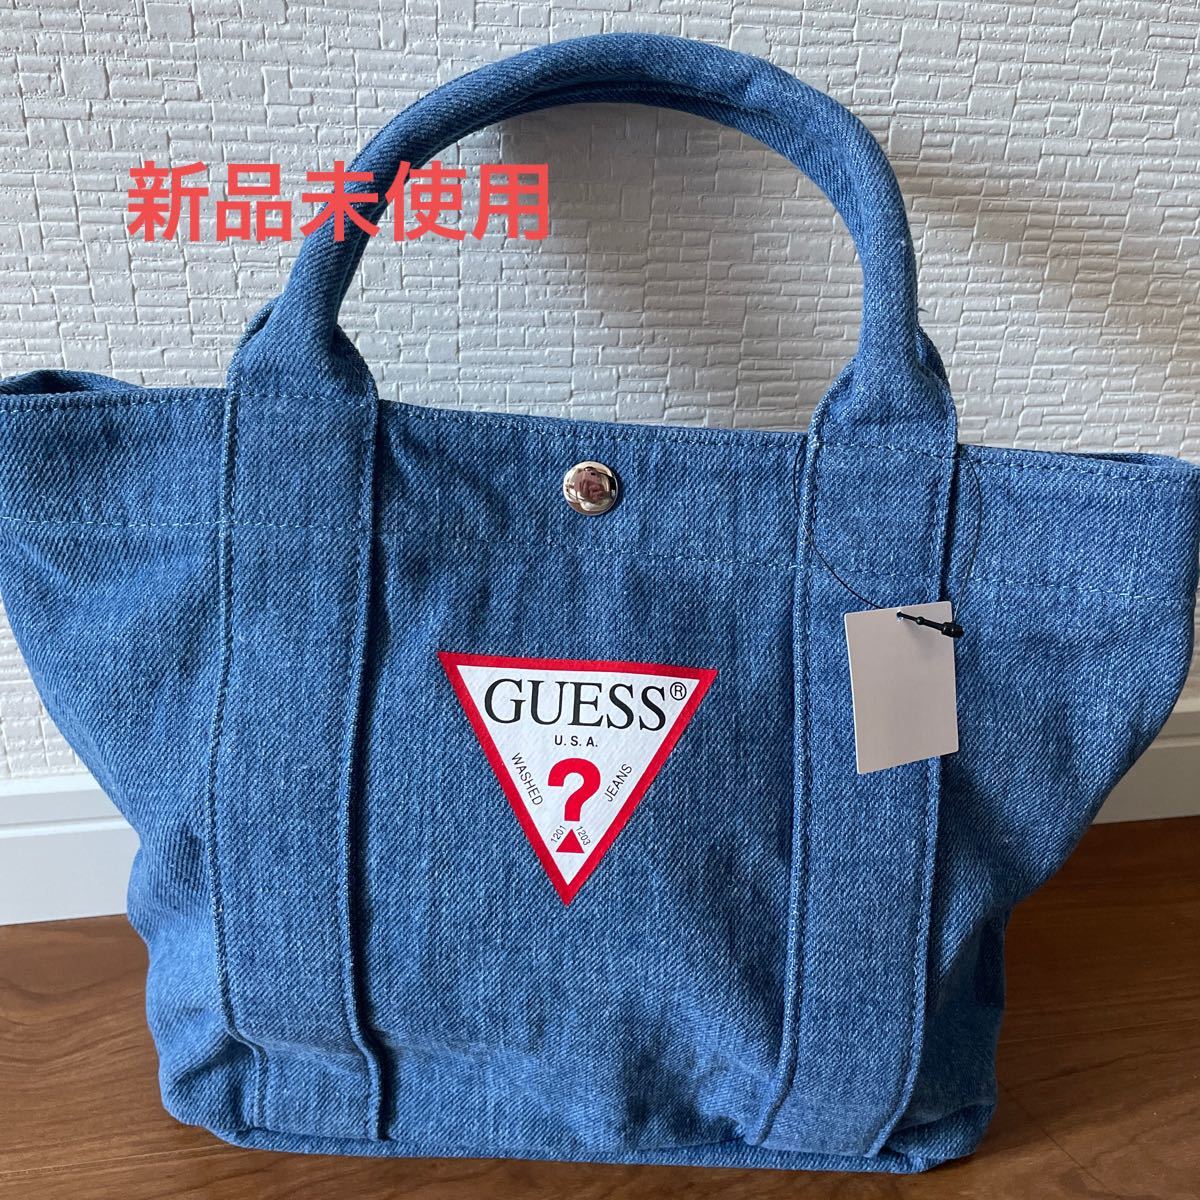 GUESS トートバッグの新品・未使用品・中古品｜PayPayフリマ